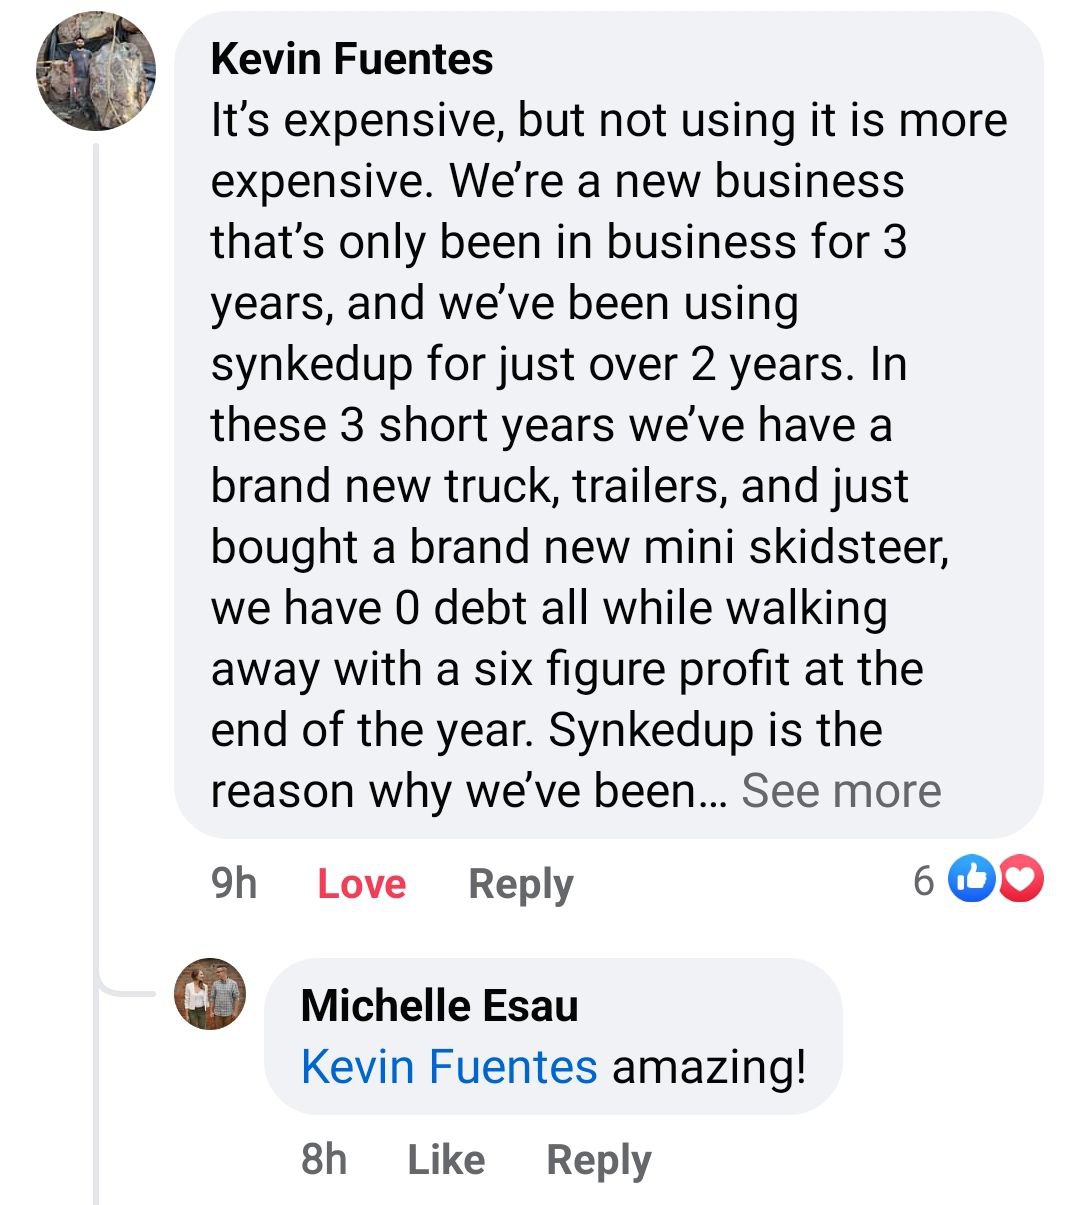 Kevin Fuentes SynkedUP Review